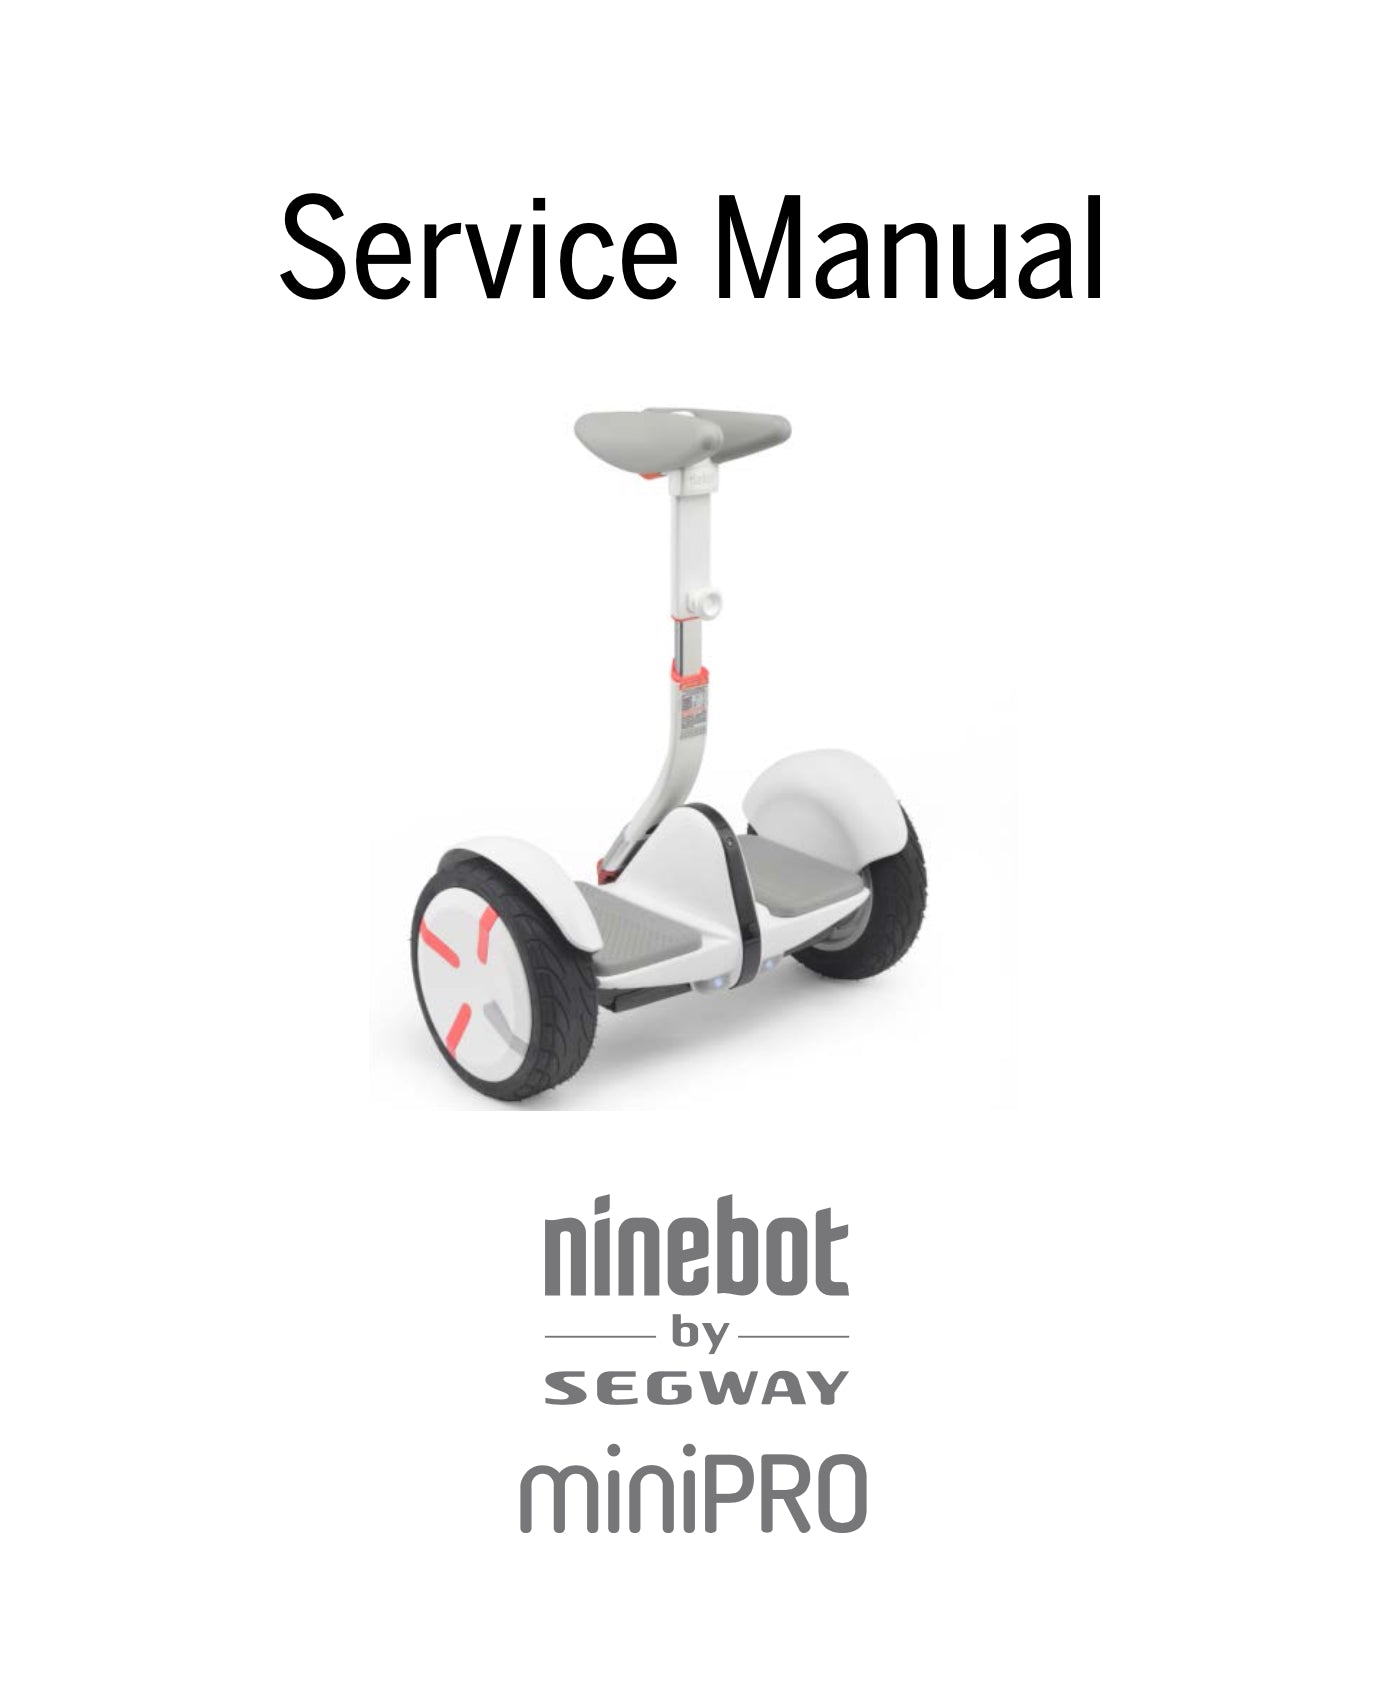 Complete Repair Guide for Ninebot S and Segway miniPRO - M4M